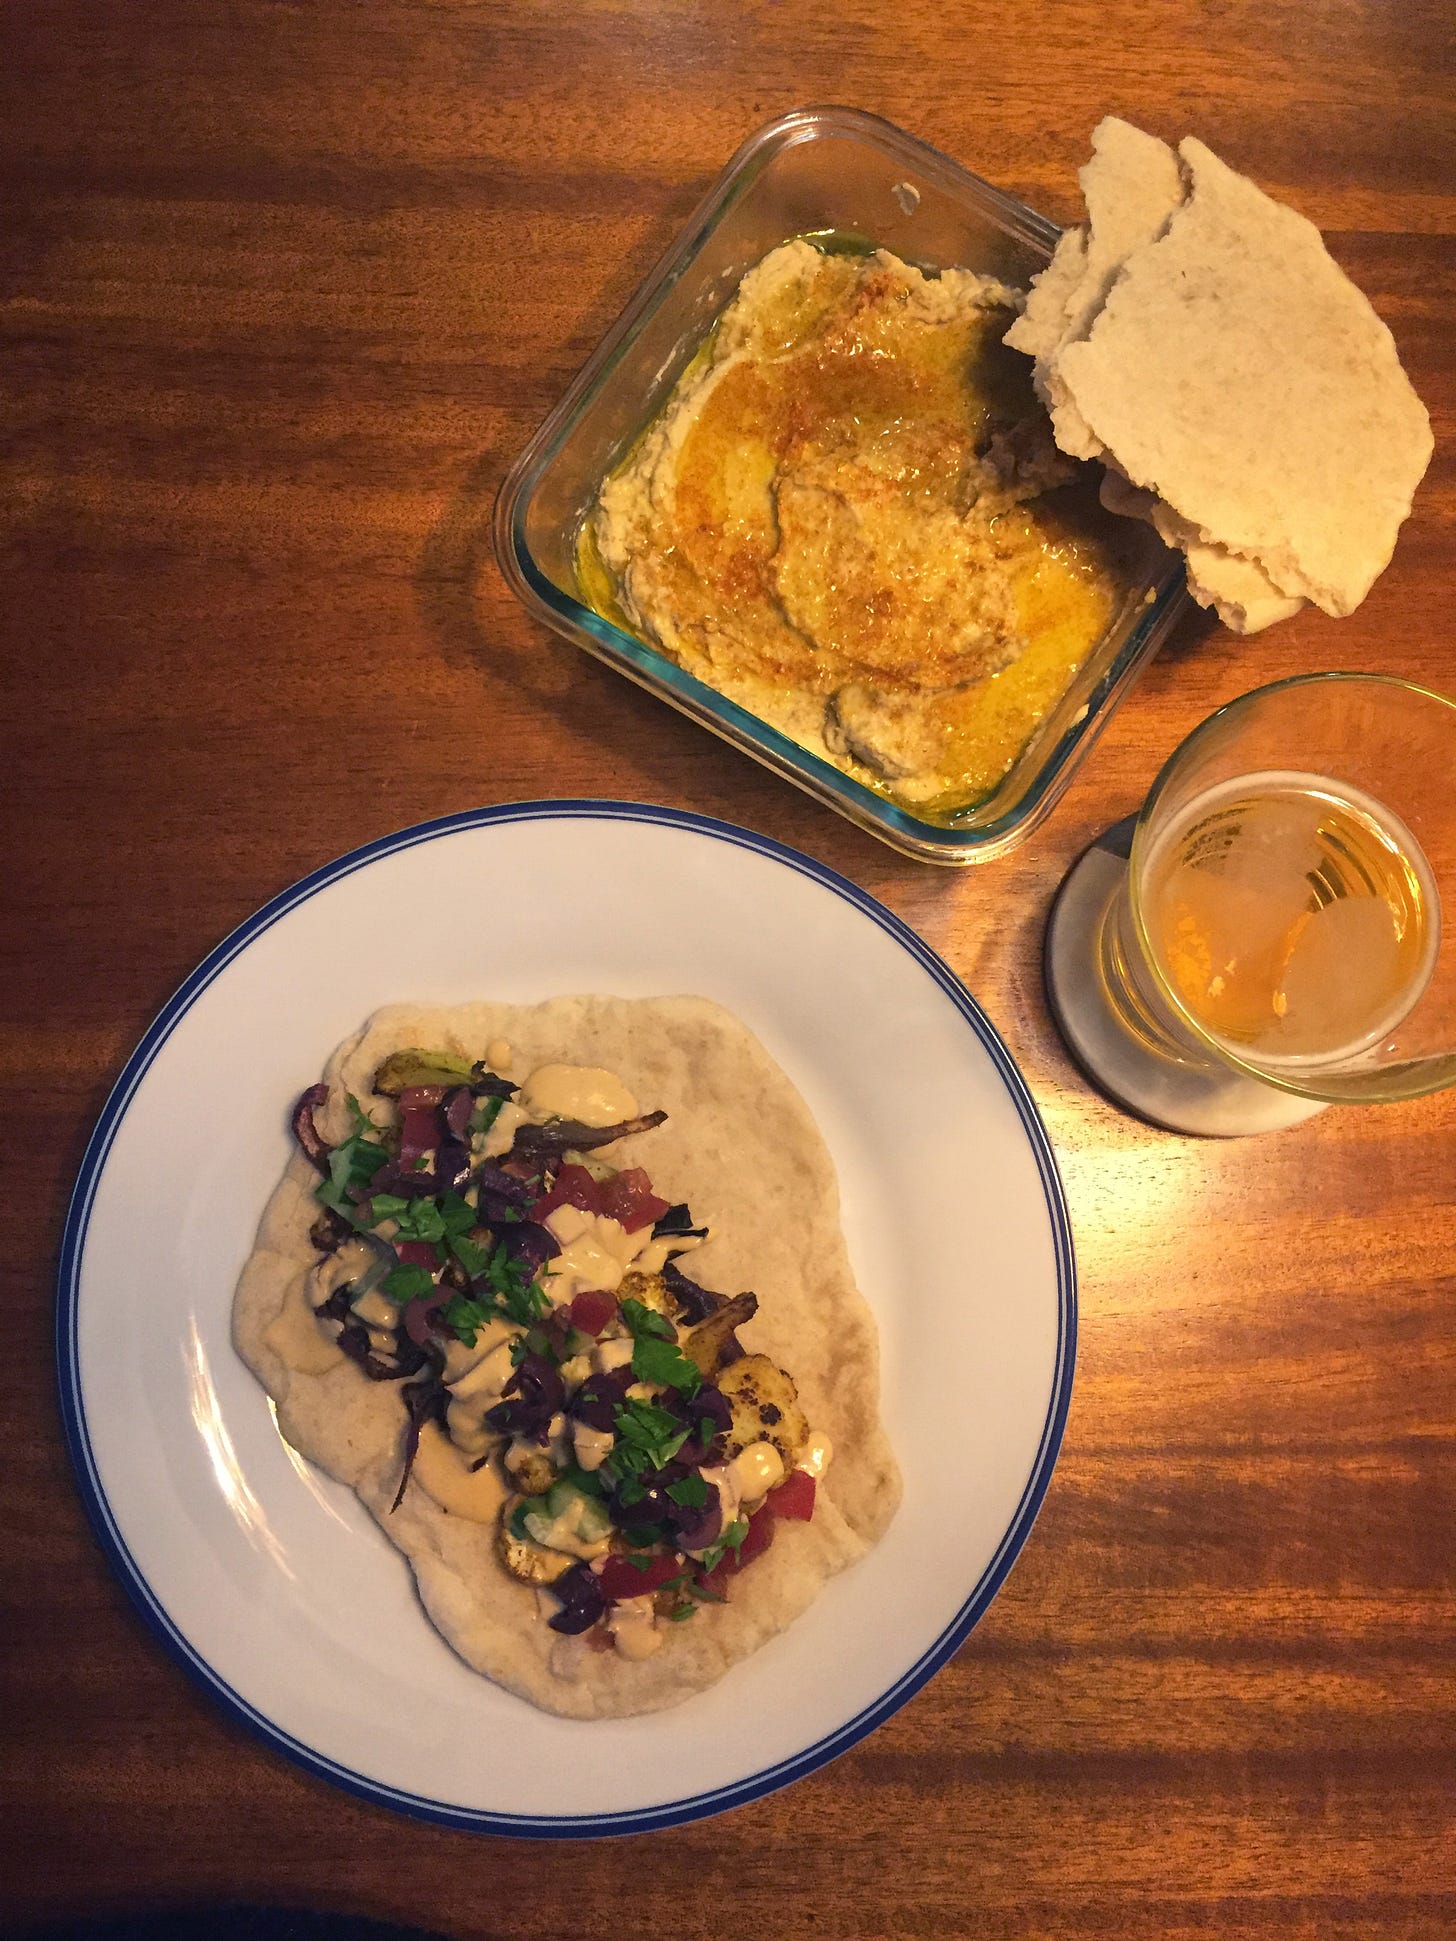 A large plate with a pita covered in roasted cauliflower and chopped vegetables, drizzled with tahini sauce. Above the plate is a square glass container of hummus, coated in olive oil and dusted with paprika and cumin. Torn pieces of pita rest on the side. Next to them on a coaster is a half-full glass of beer.